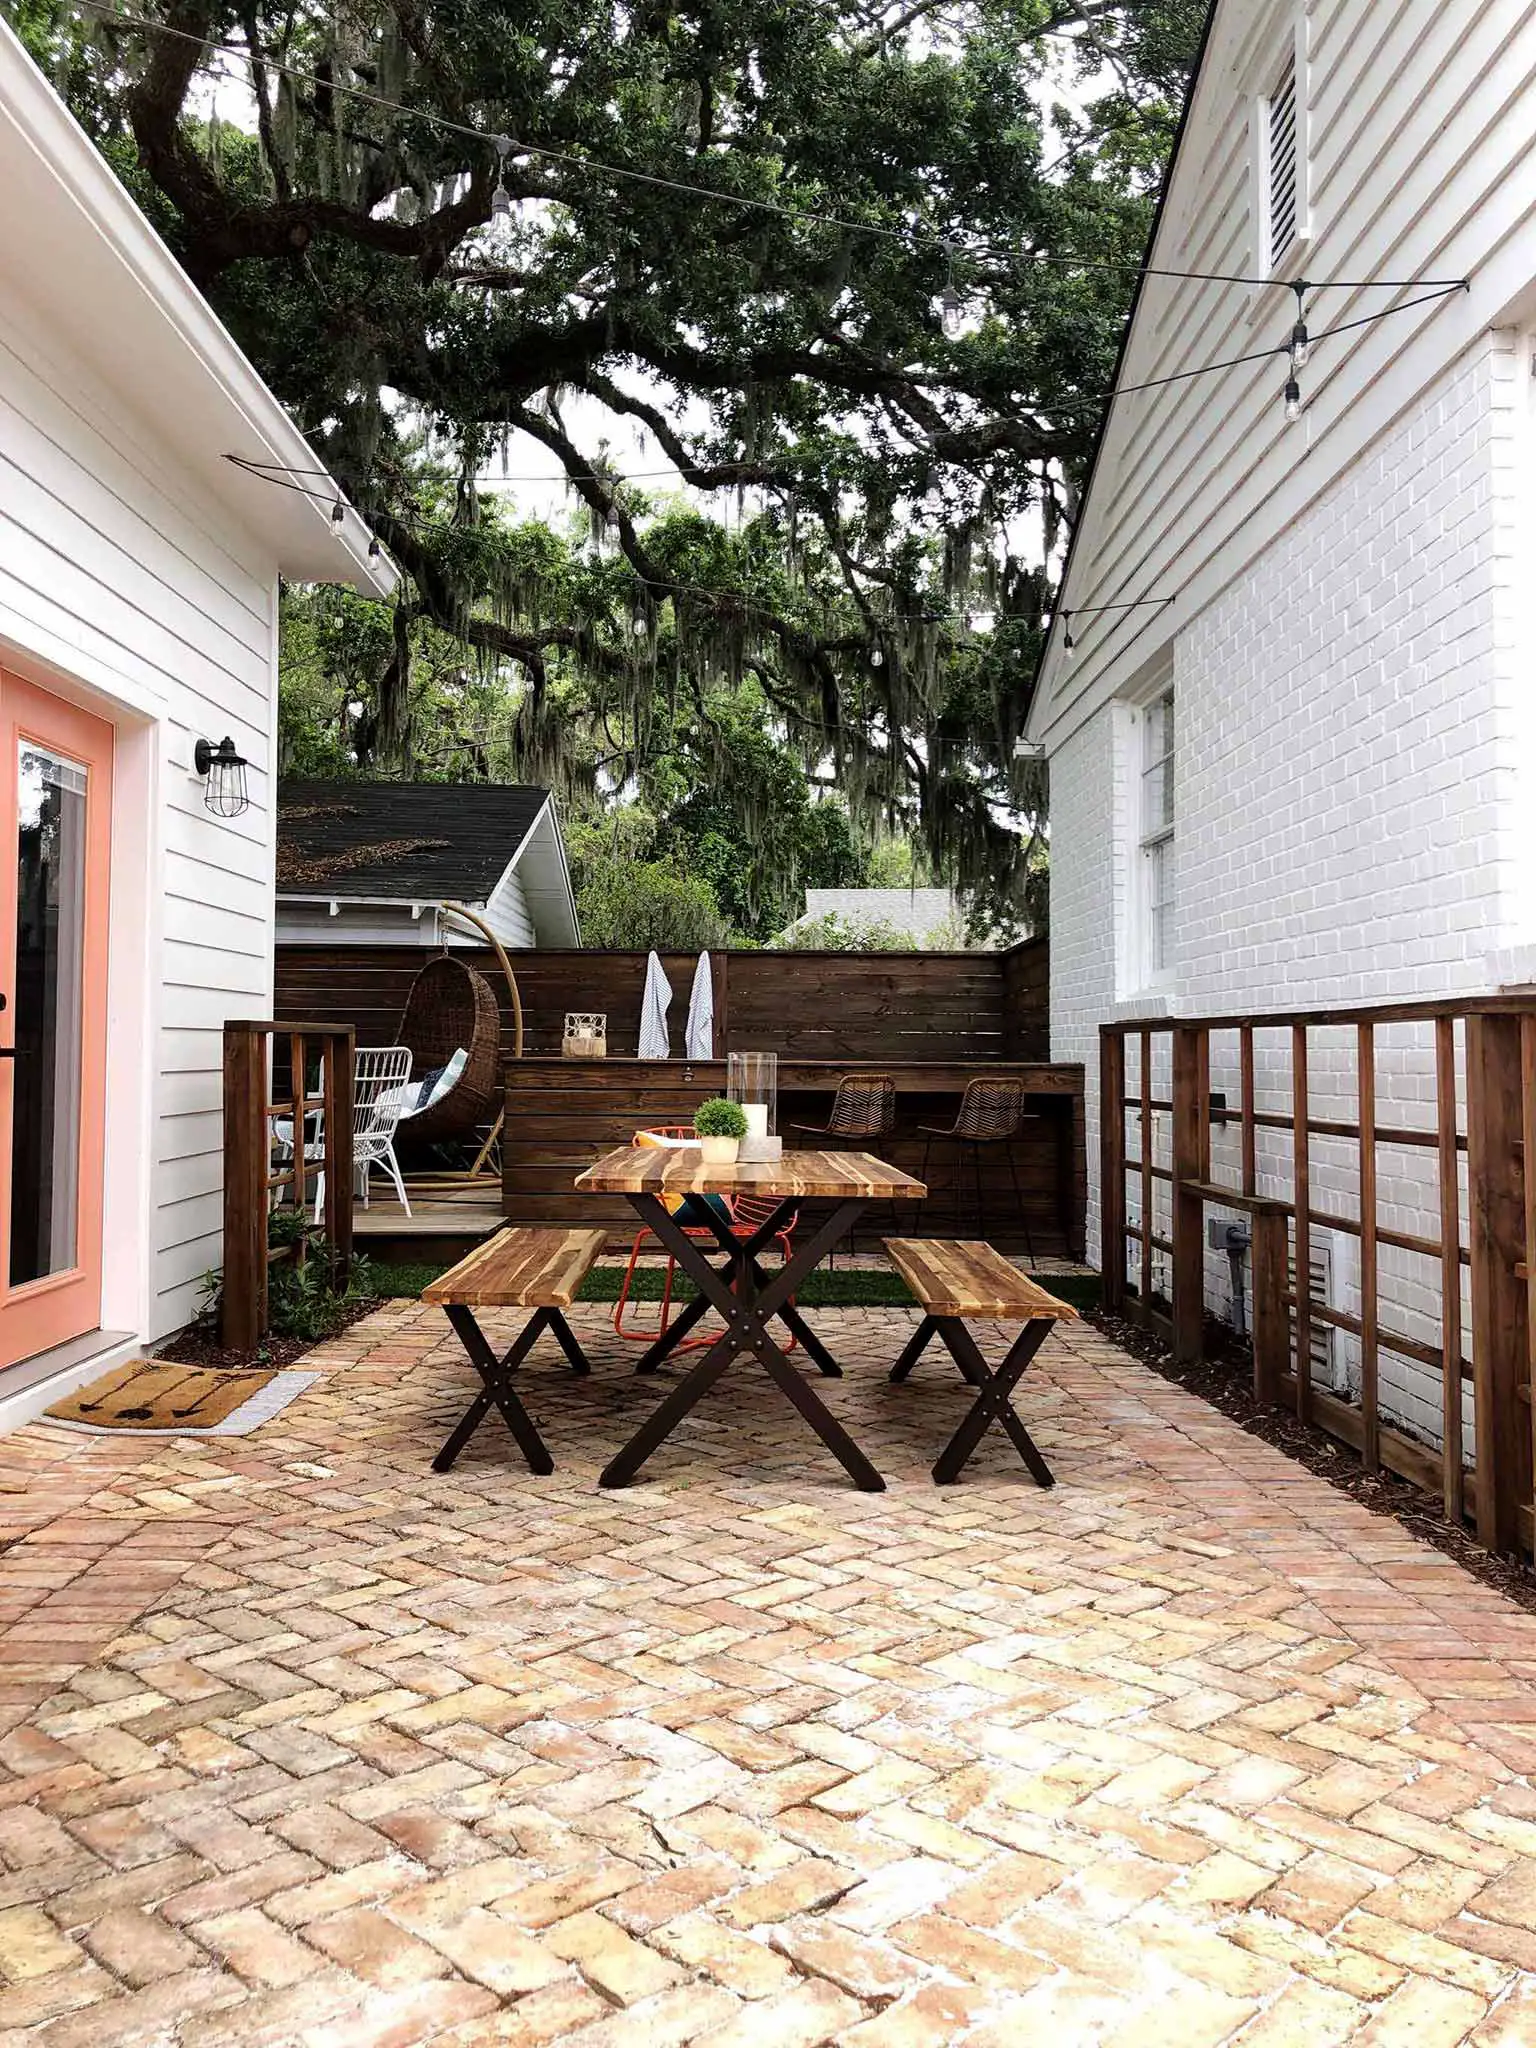 brick patio with table and benches